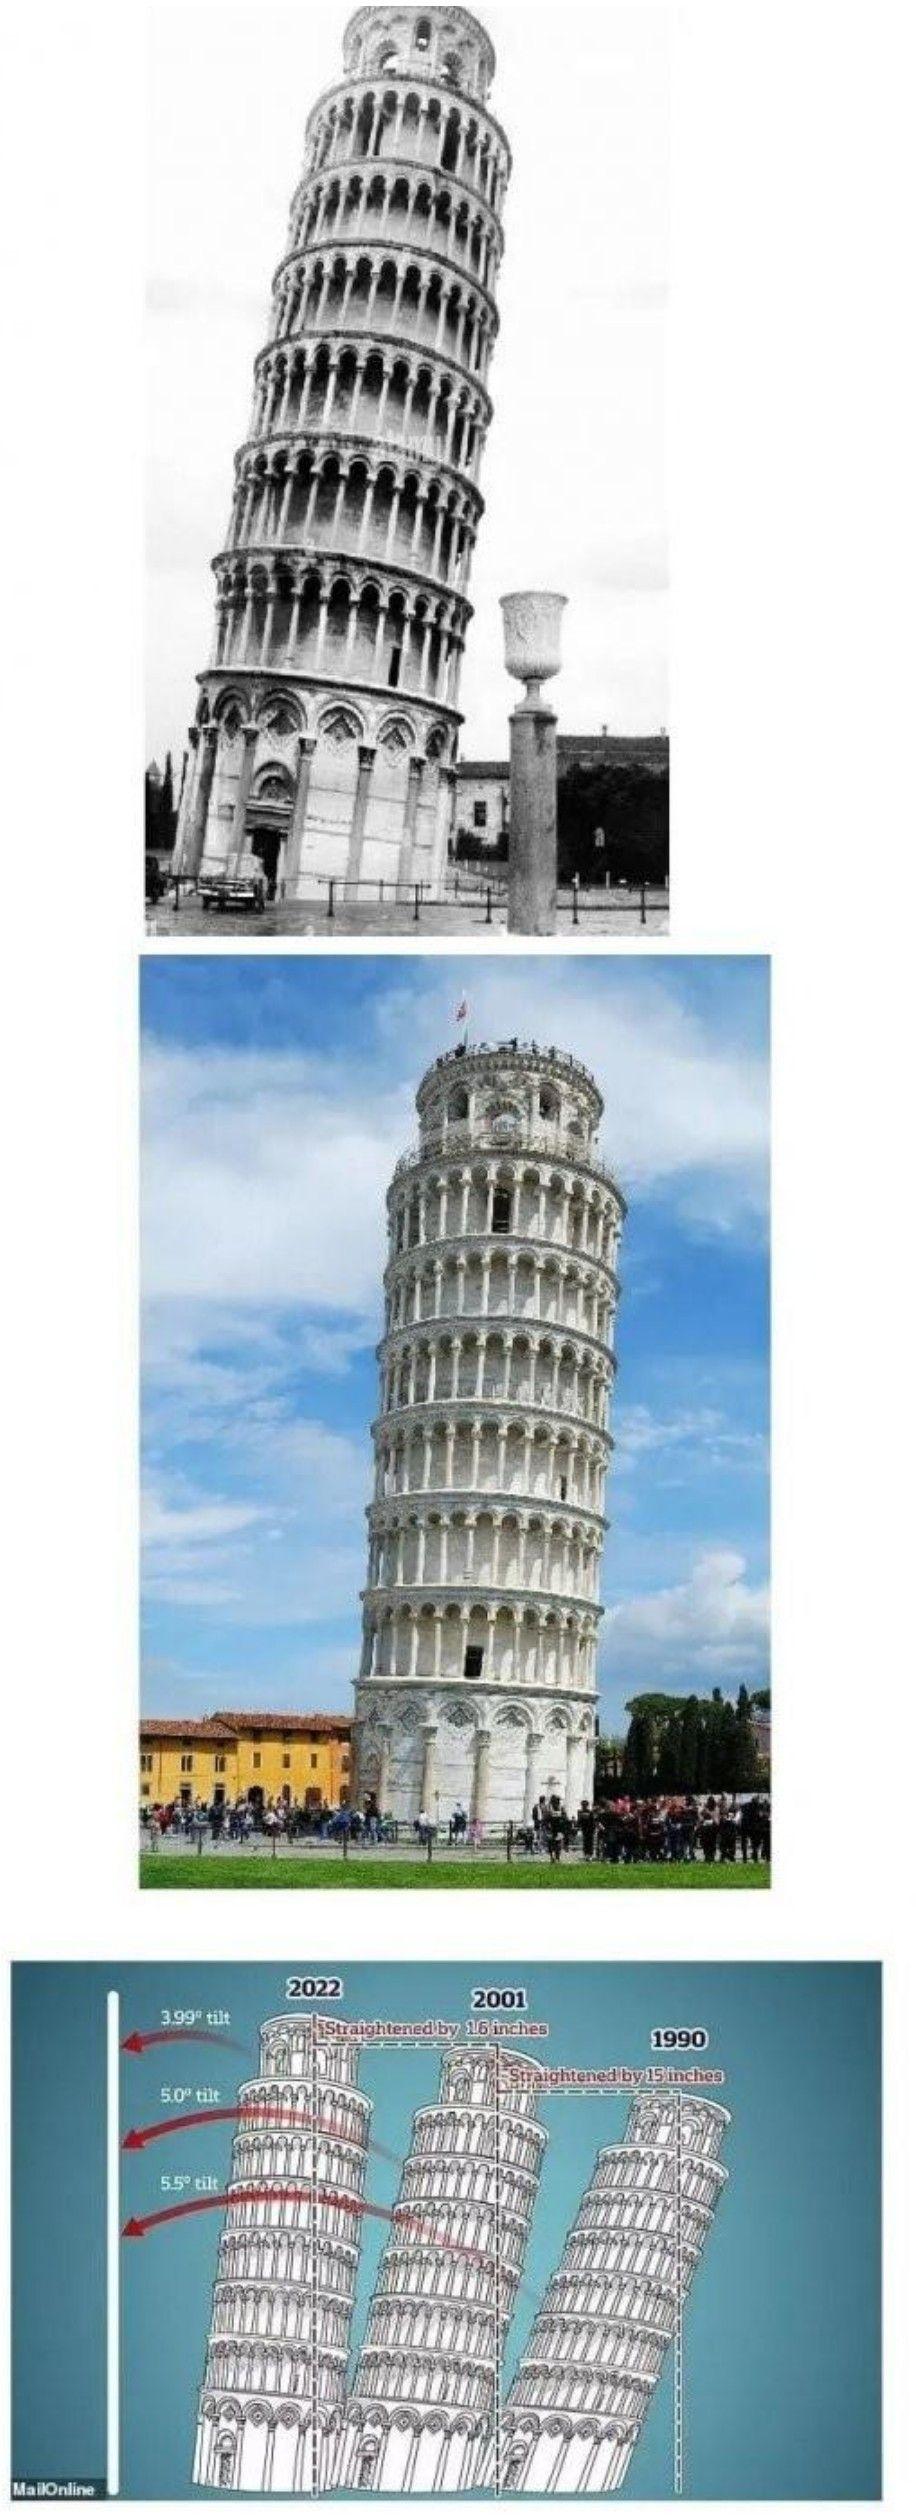 The Leaning Tower of Pisa Problem Happened